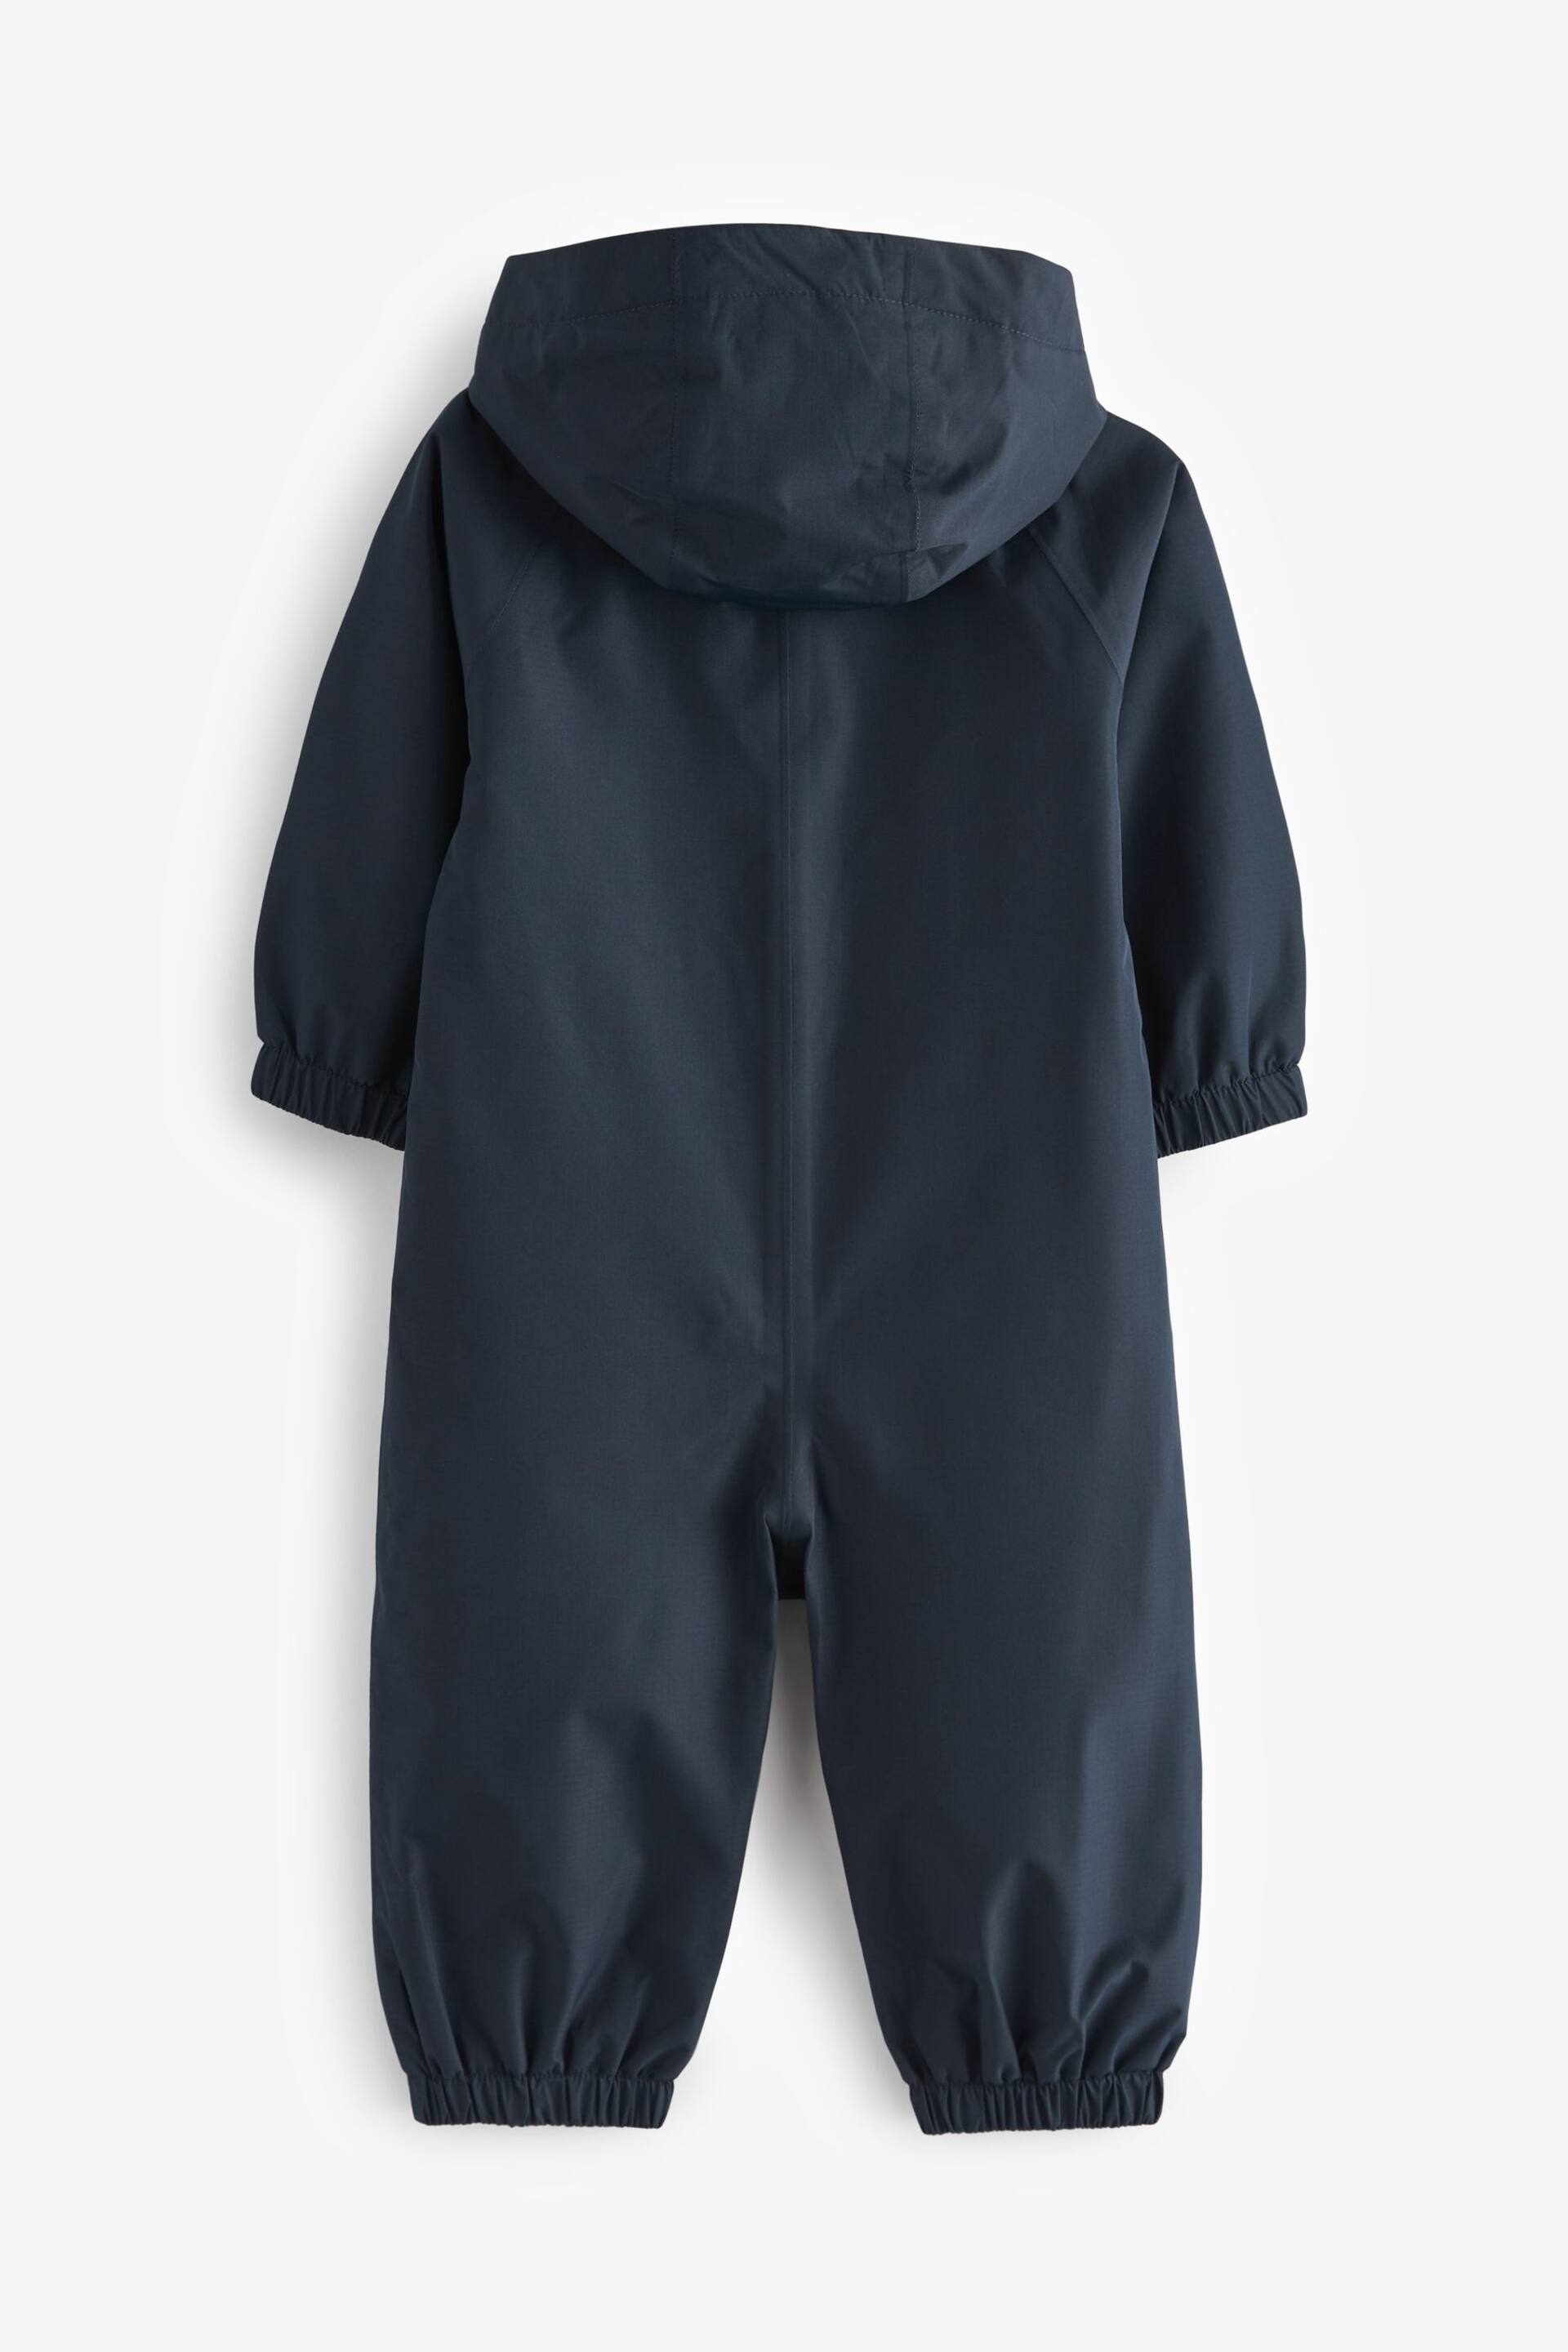 Navy Blue Waterproof Fleece Lined Puddlesuit (3mths-7yrs) - Image 5 of 10